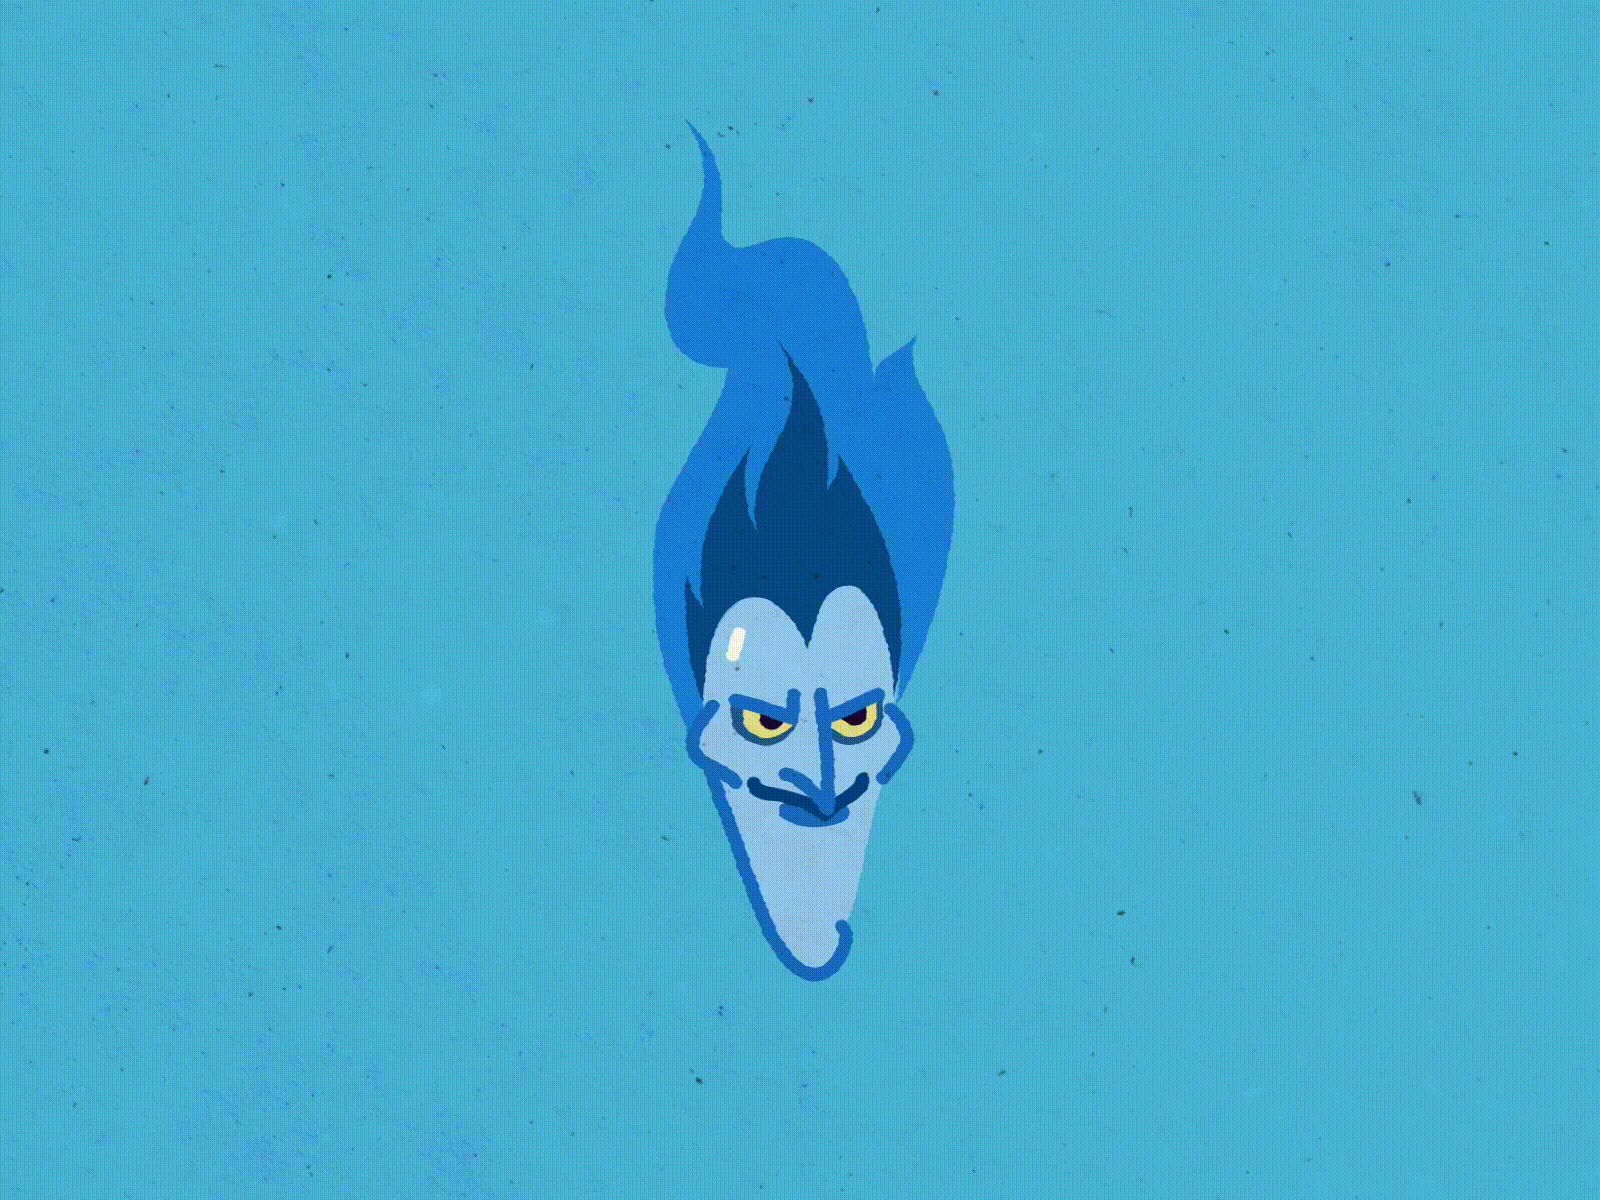 The head of Hades after effects animation characteranimation disney hades herules illustration inspiration mograph motion motion graphics motiongraphics